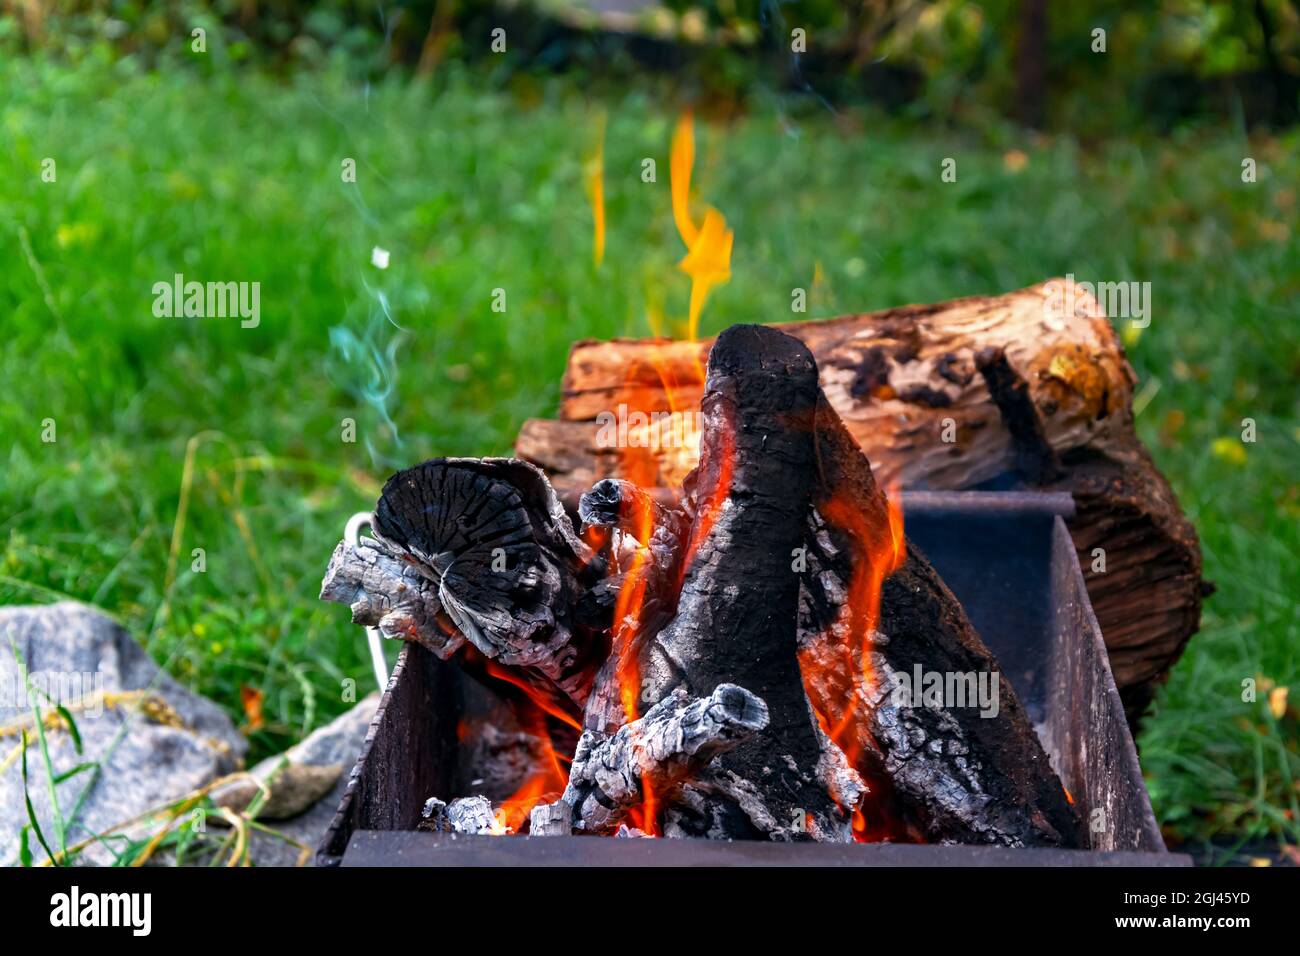 A burning bonfire of stacked oak firewood against a background of green grass with bright red flames and a small plume of smoke. For grilling, without people. Close-Up. Horizontal photo. Stock Photo